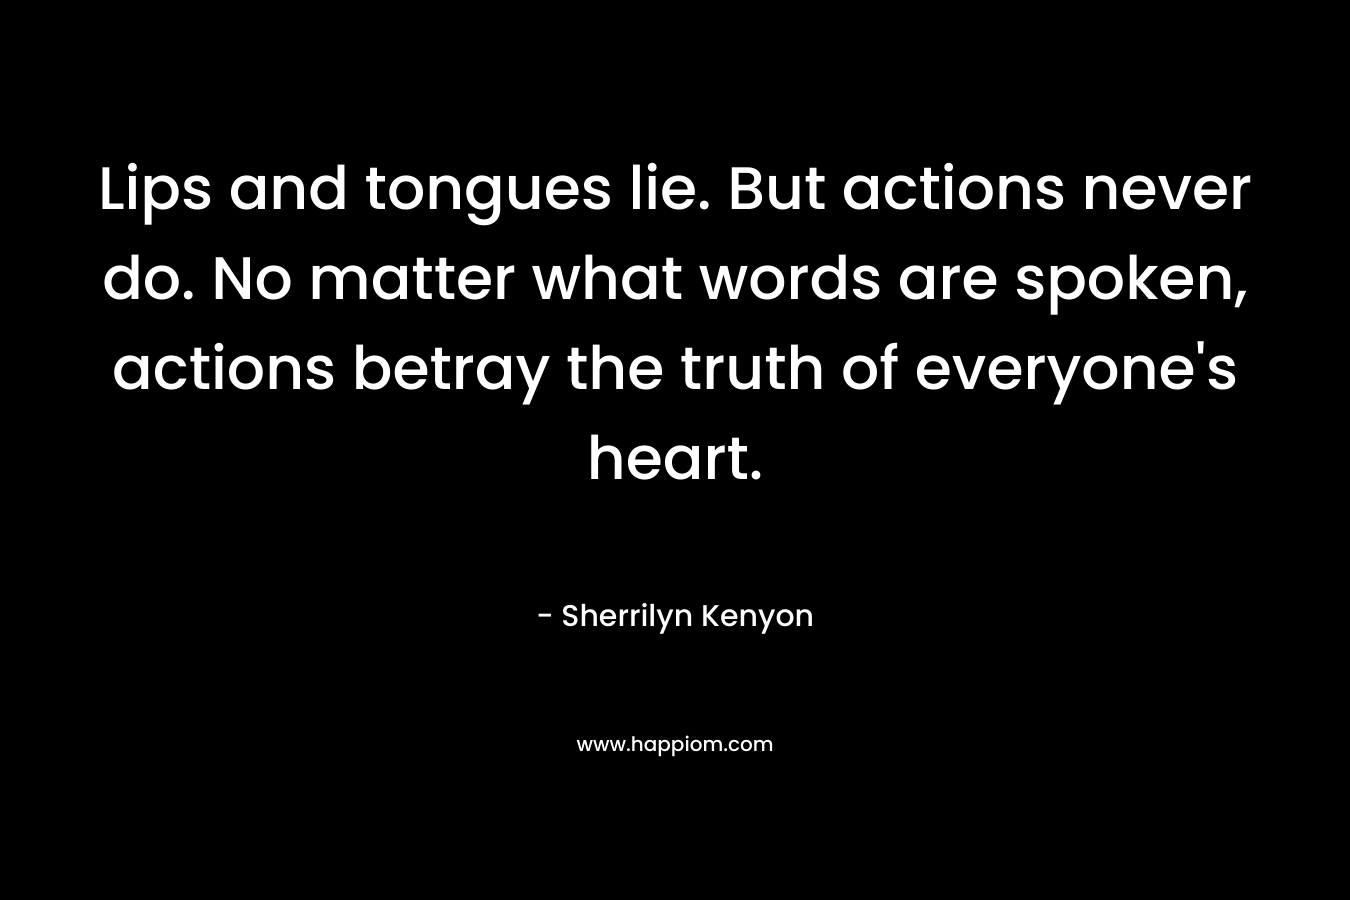 Lips and tongues lie. But actions never do. No matter what words are spoken, actions betray the truth of everyone’s heart. – Sherrilyn Kenyon